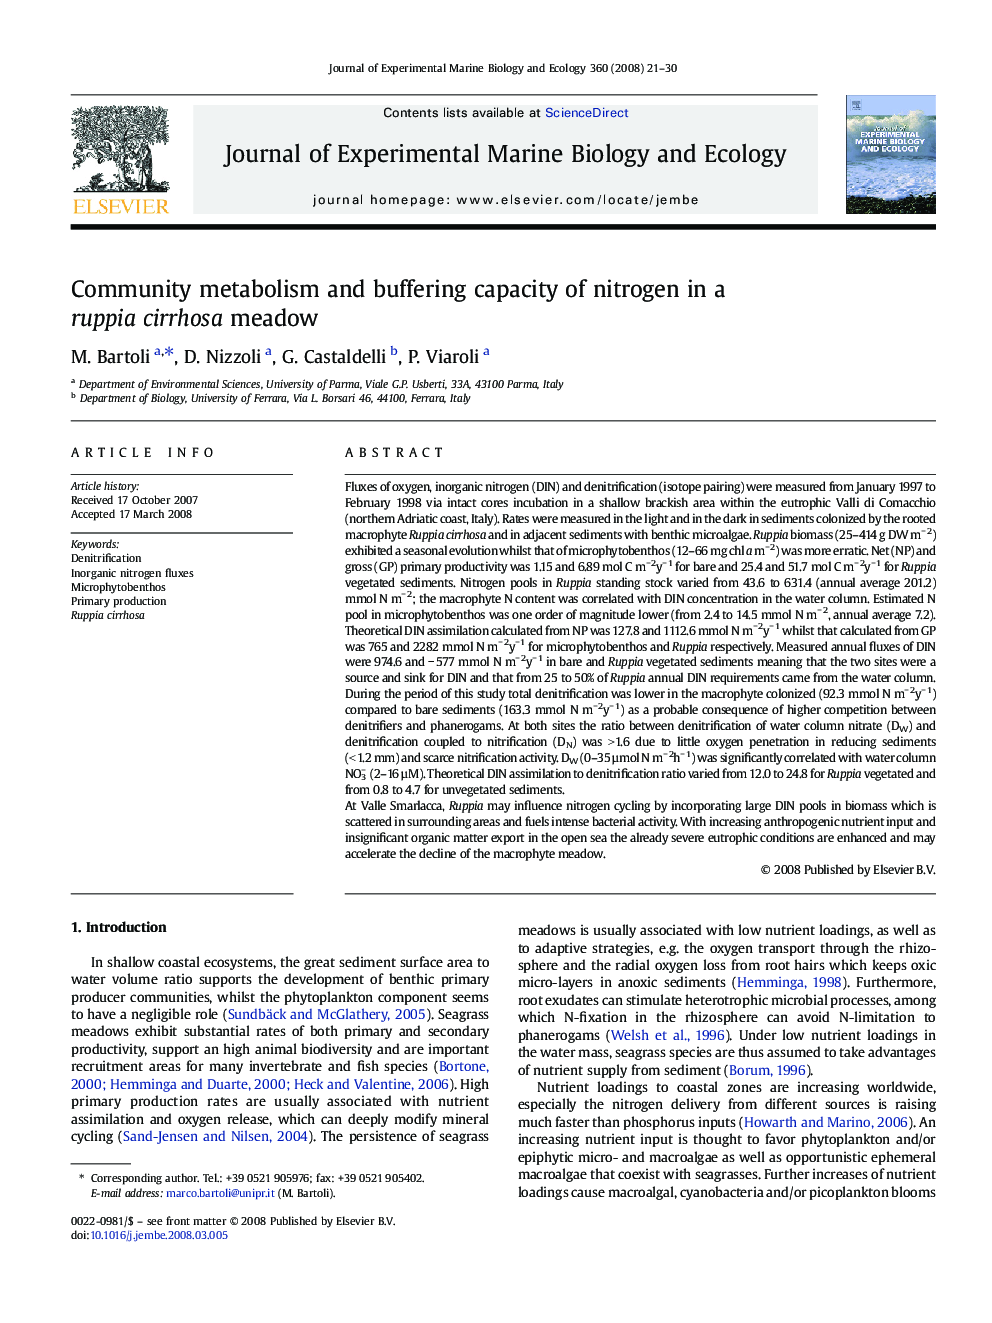 Community metabolism and buffering capacity of nitrogen in a ruppia cirrhosa meadow